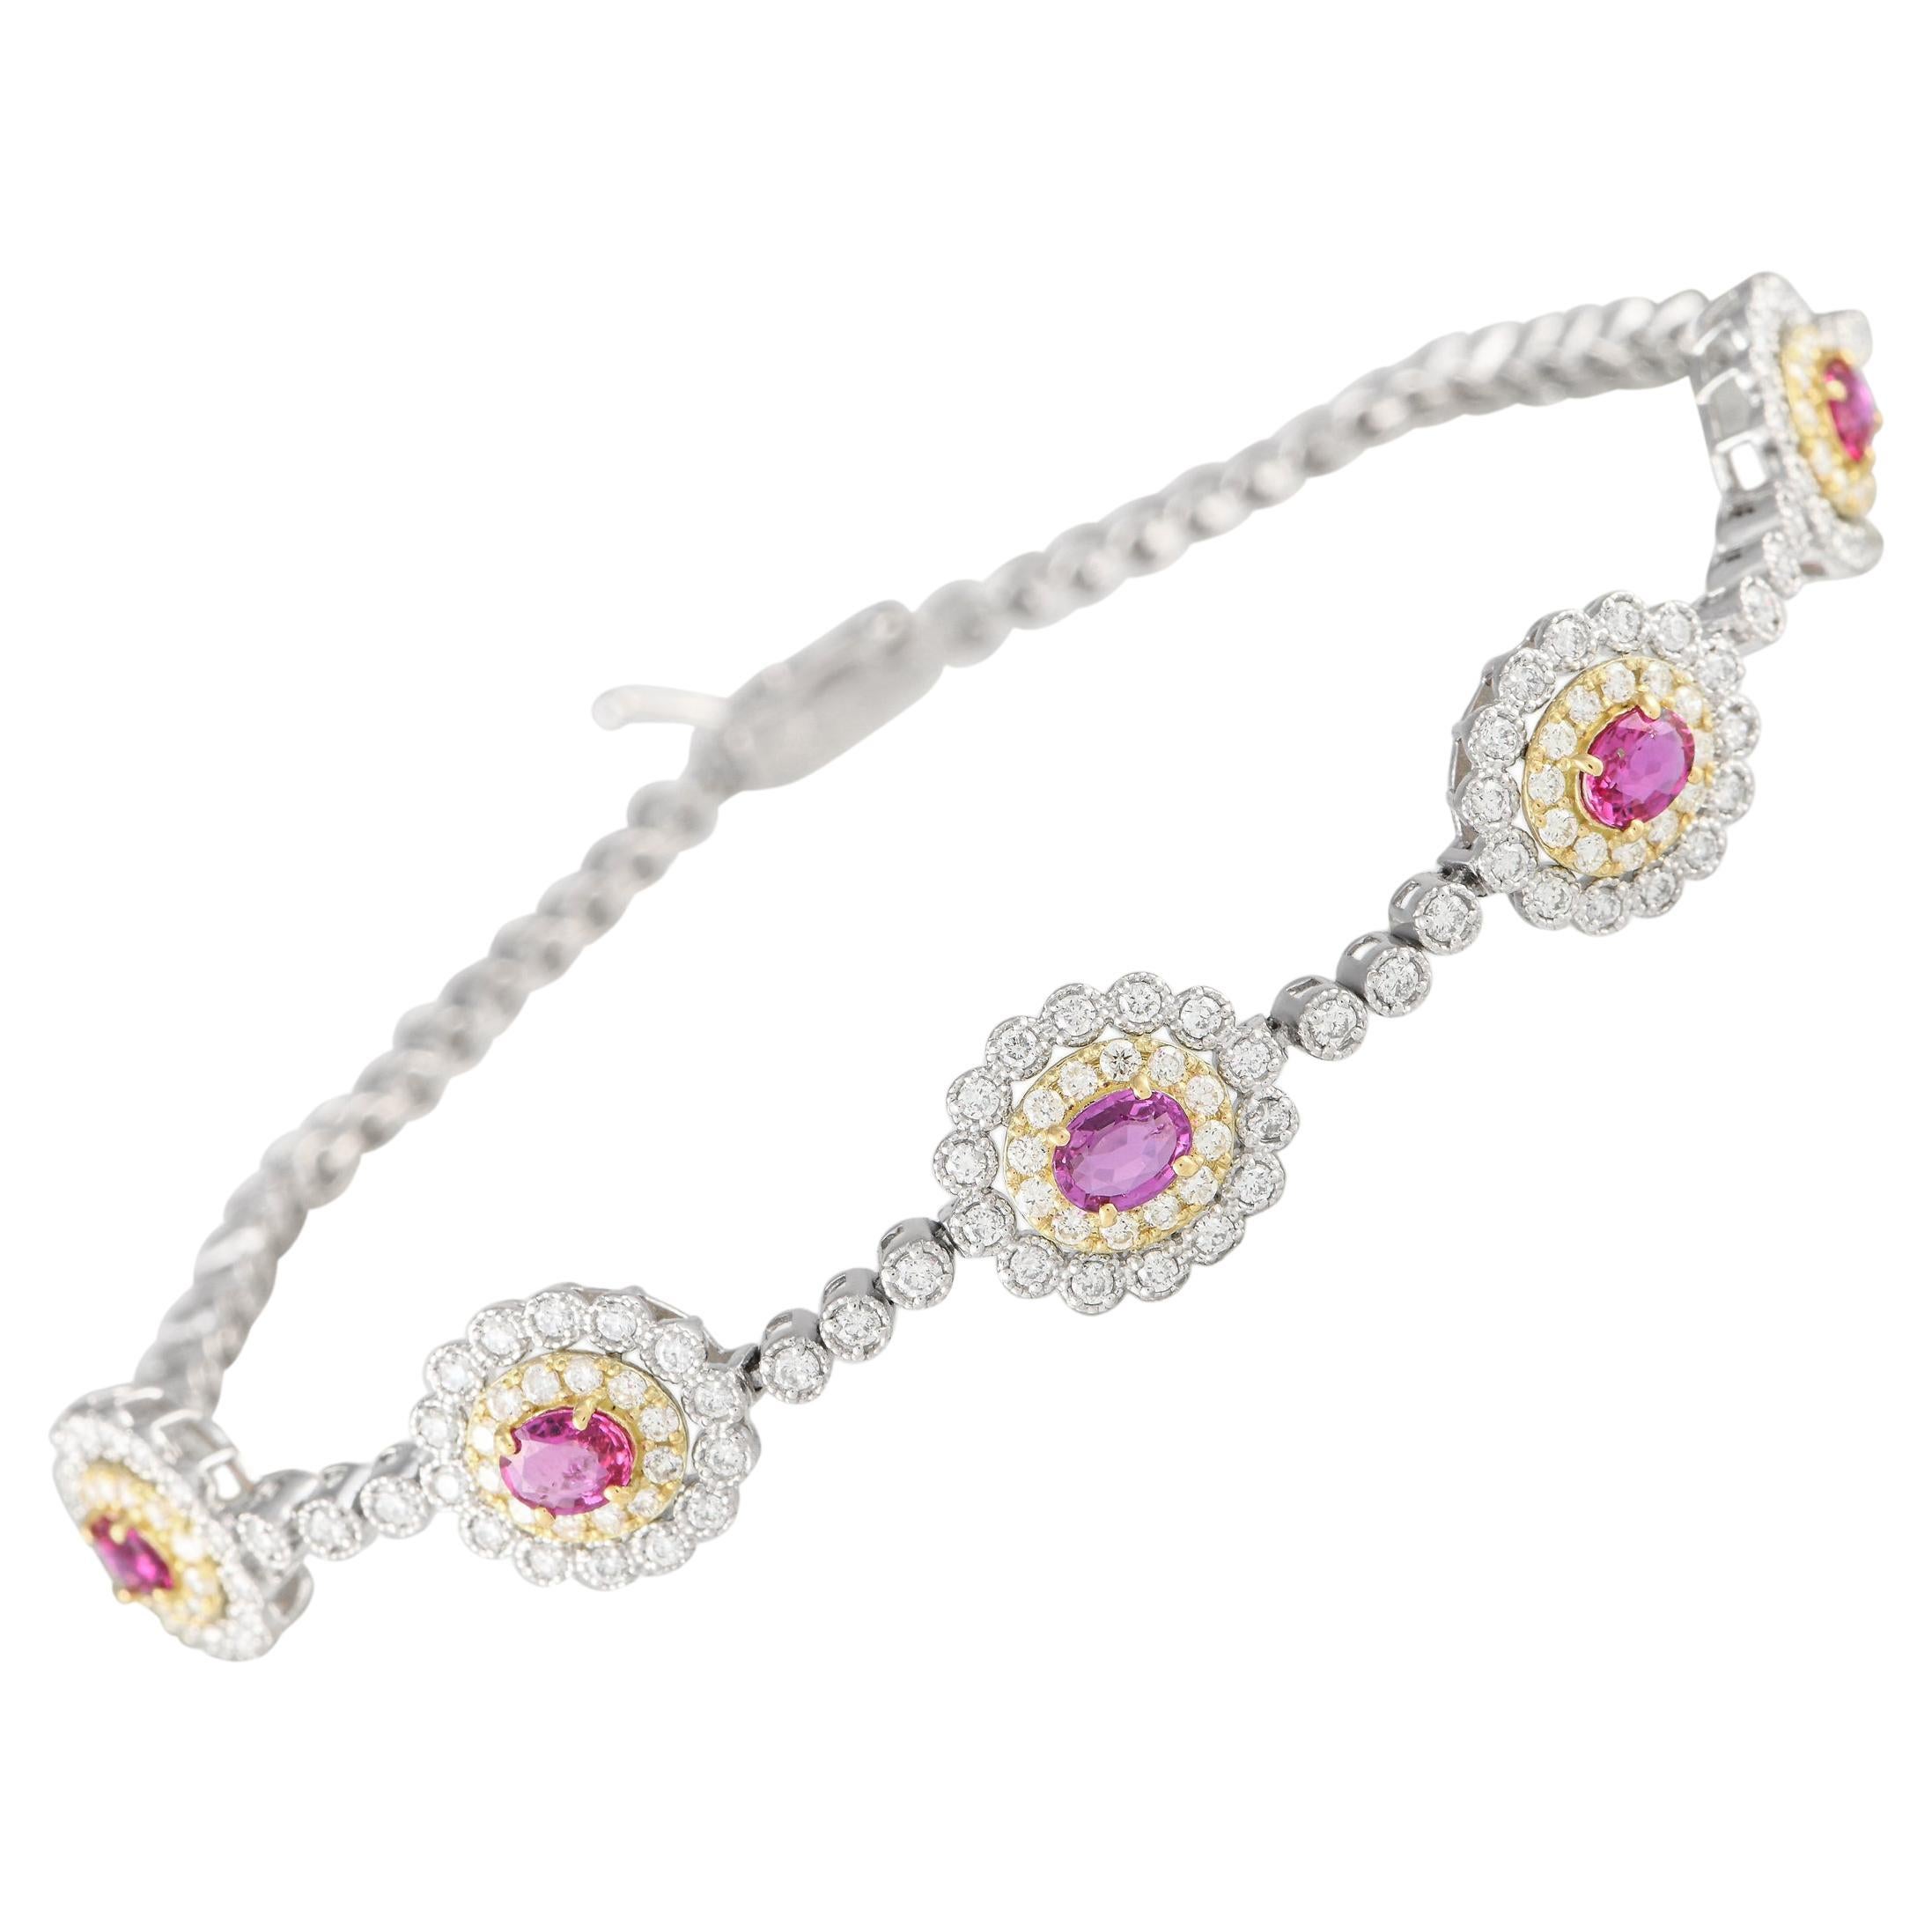 LB Exclusive 18K White Gold 1.40ct Diamond and Ruby Bracelet For Sale